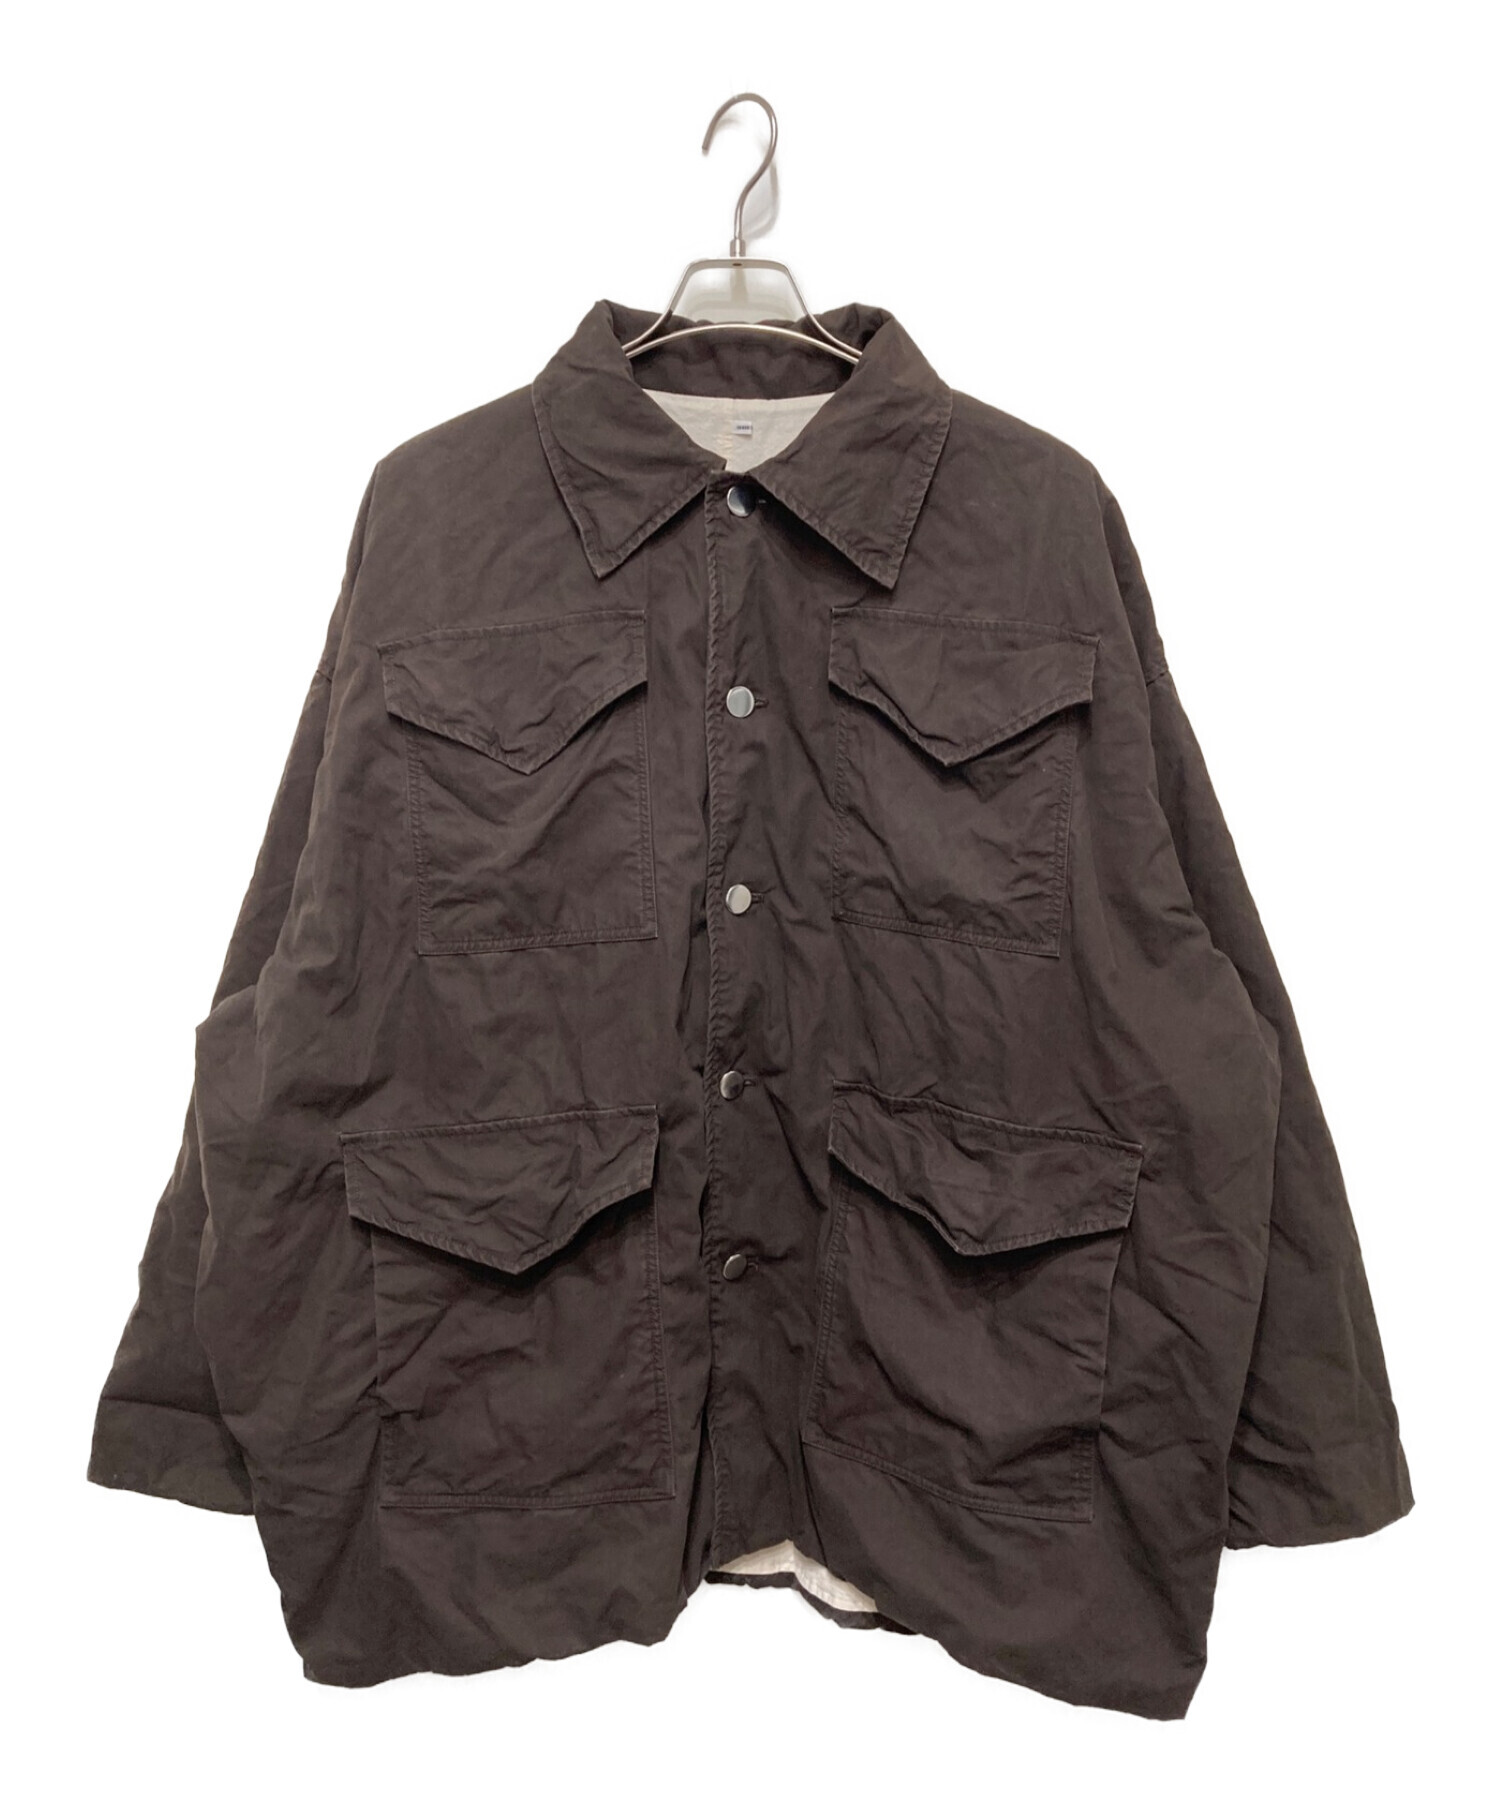 ISSUETHINGS (イシューシングス) Type 1-3 field jacket ブラウン サイズ:one-size-fits-all